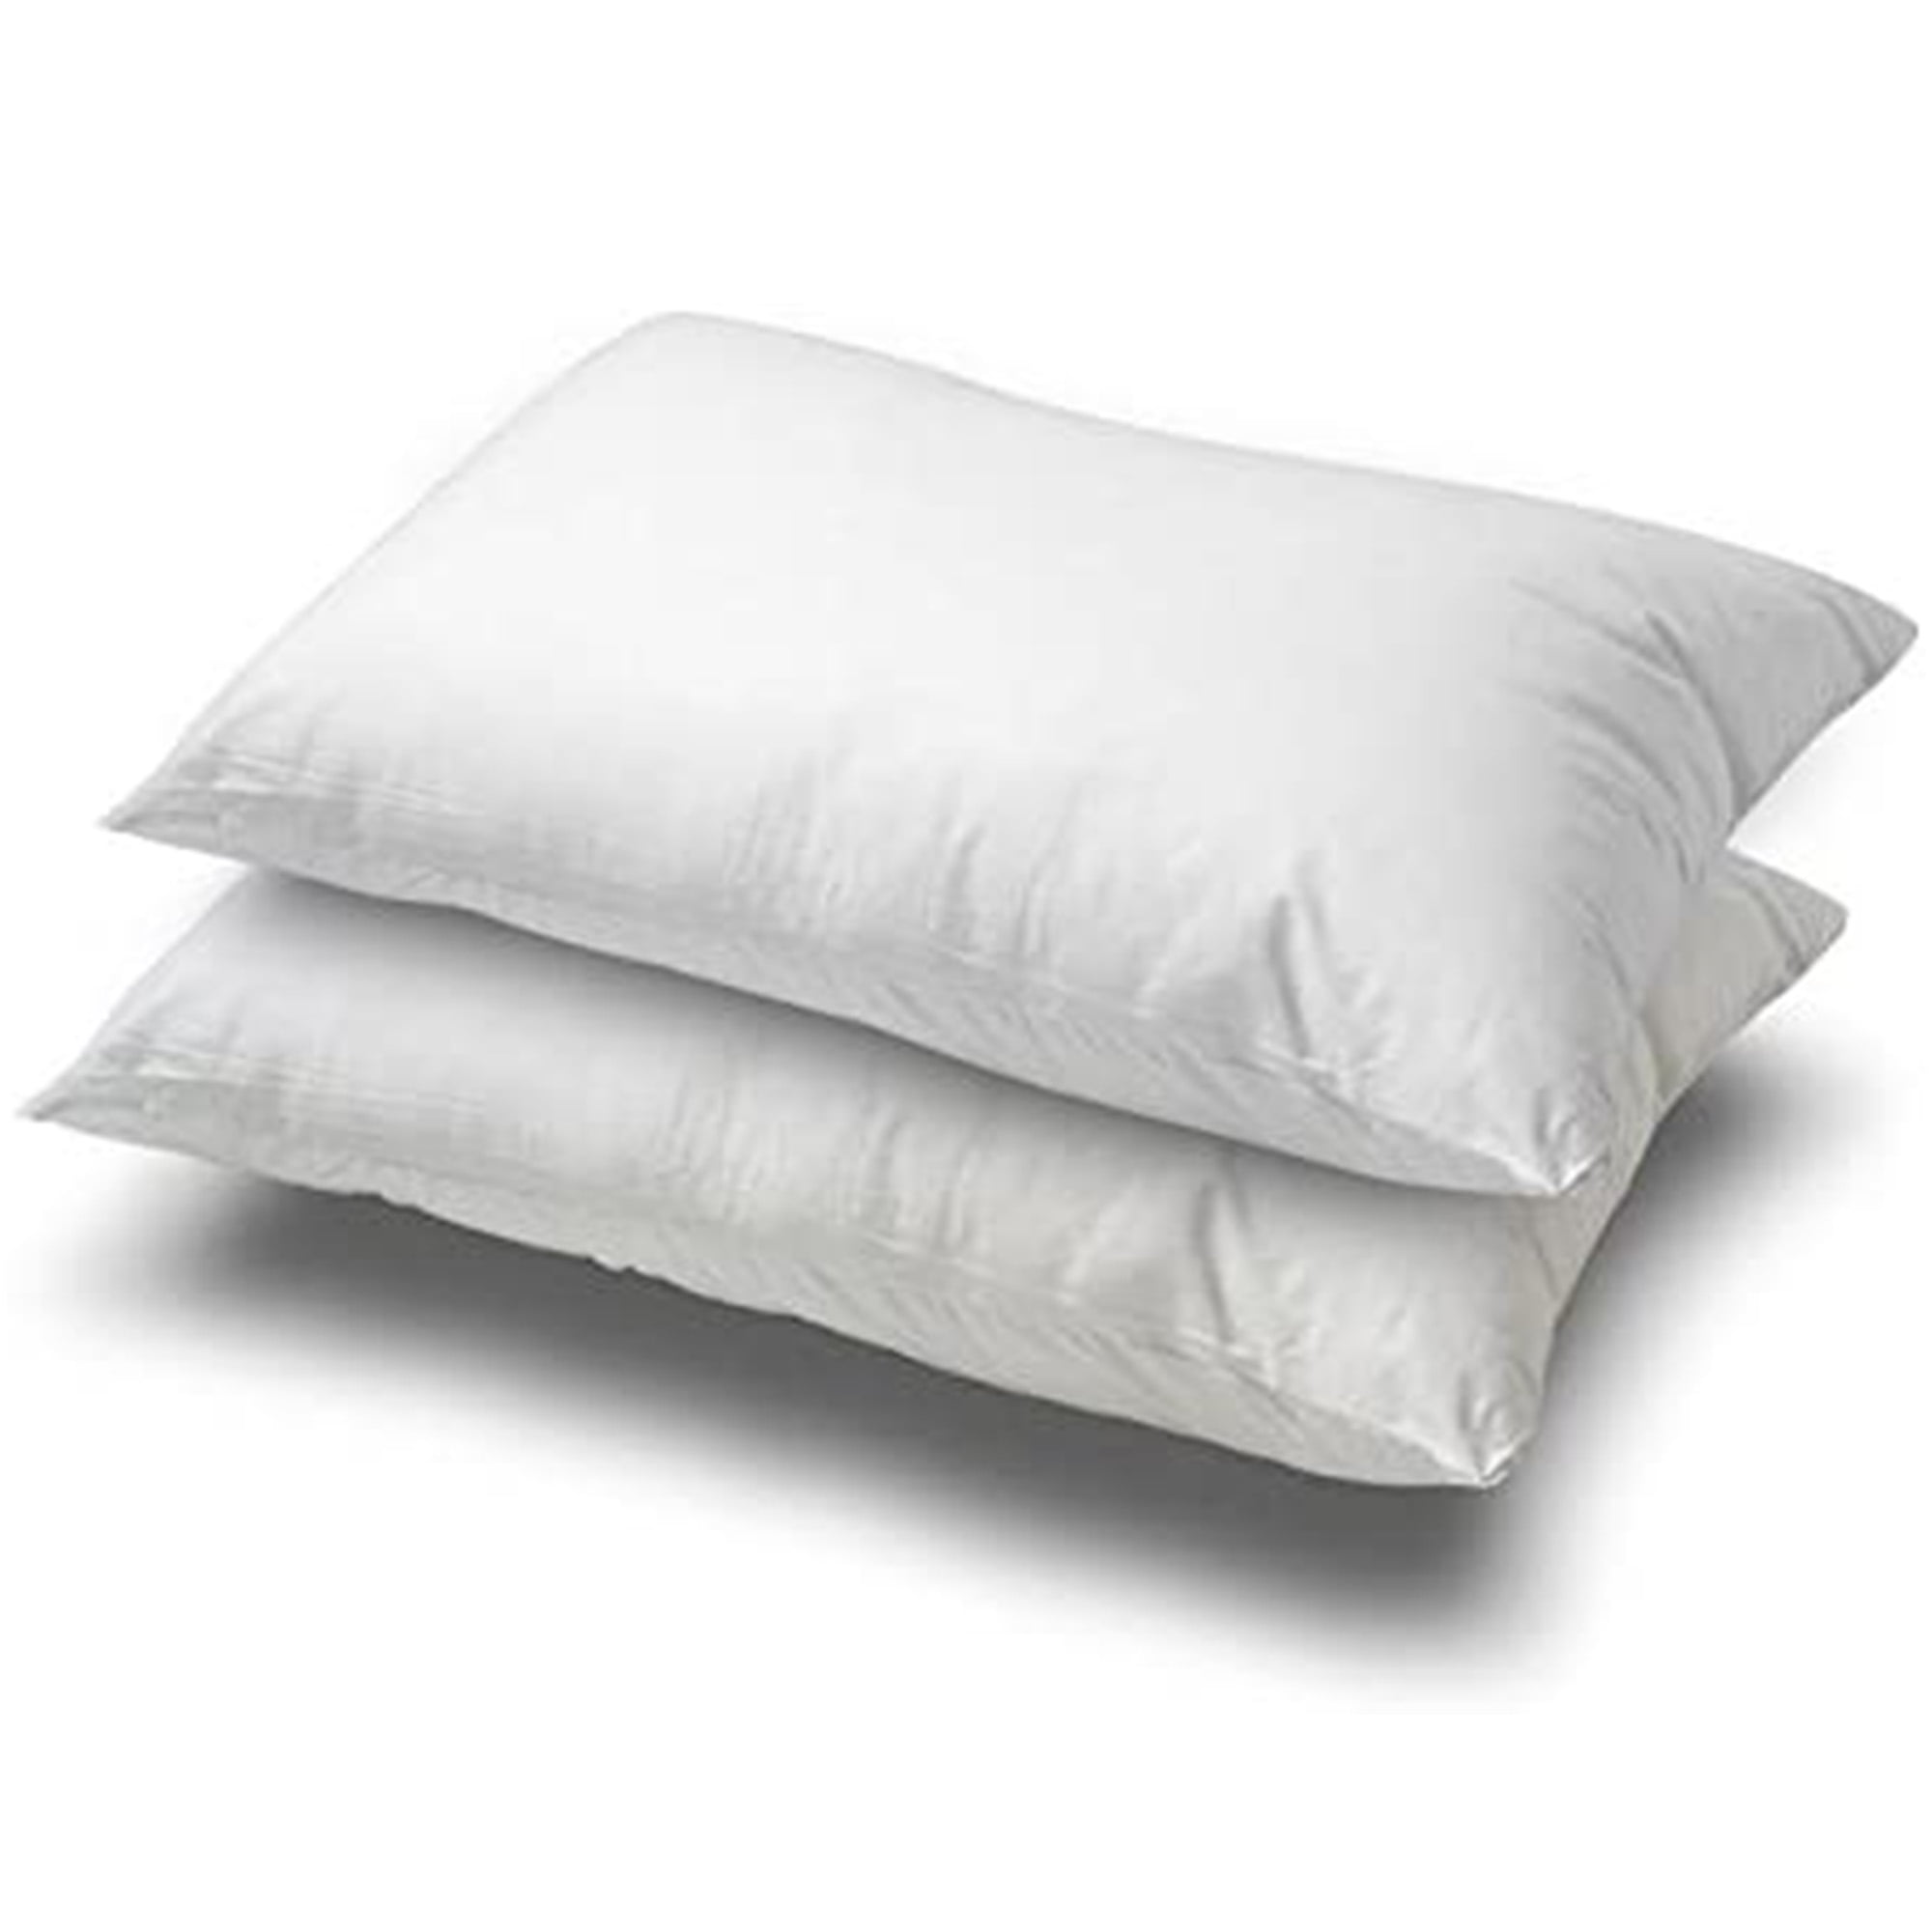 FluffCo Down Feather Pillow Firm Fluff: White King